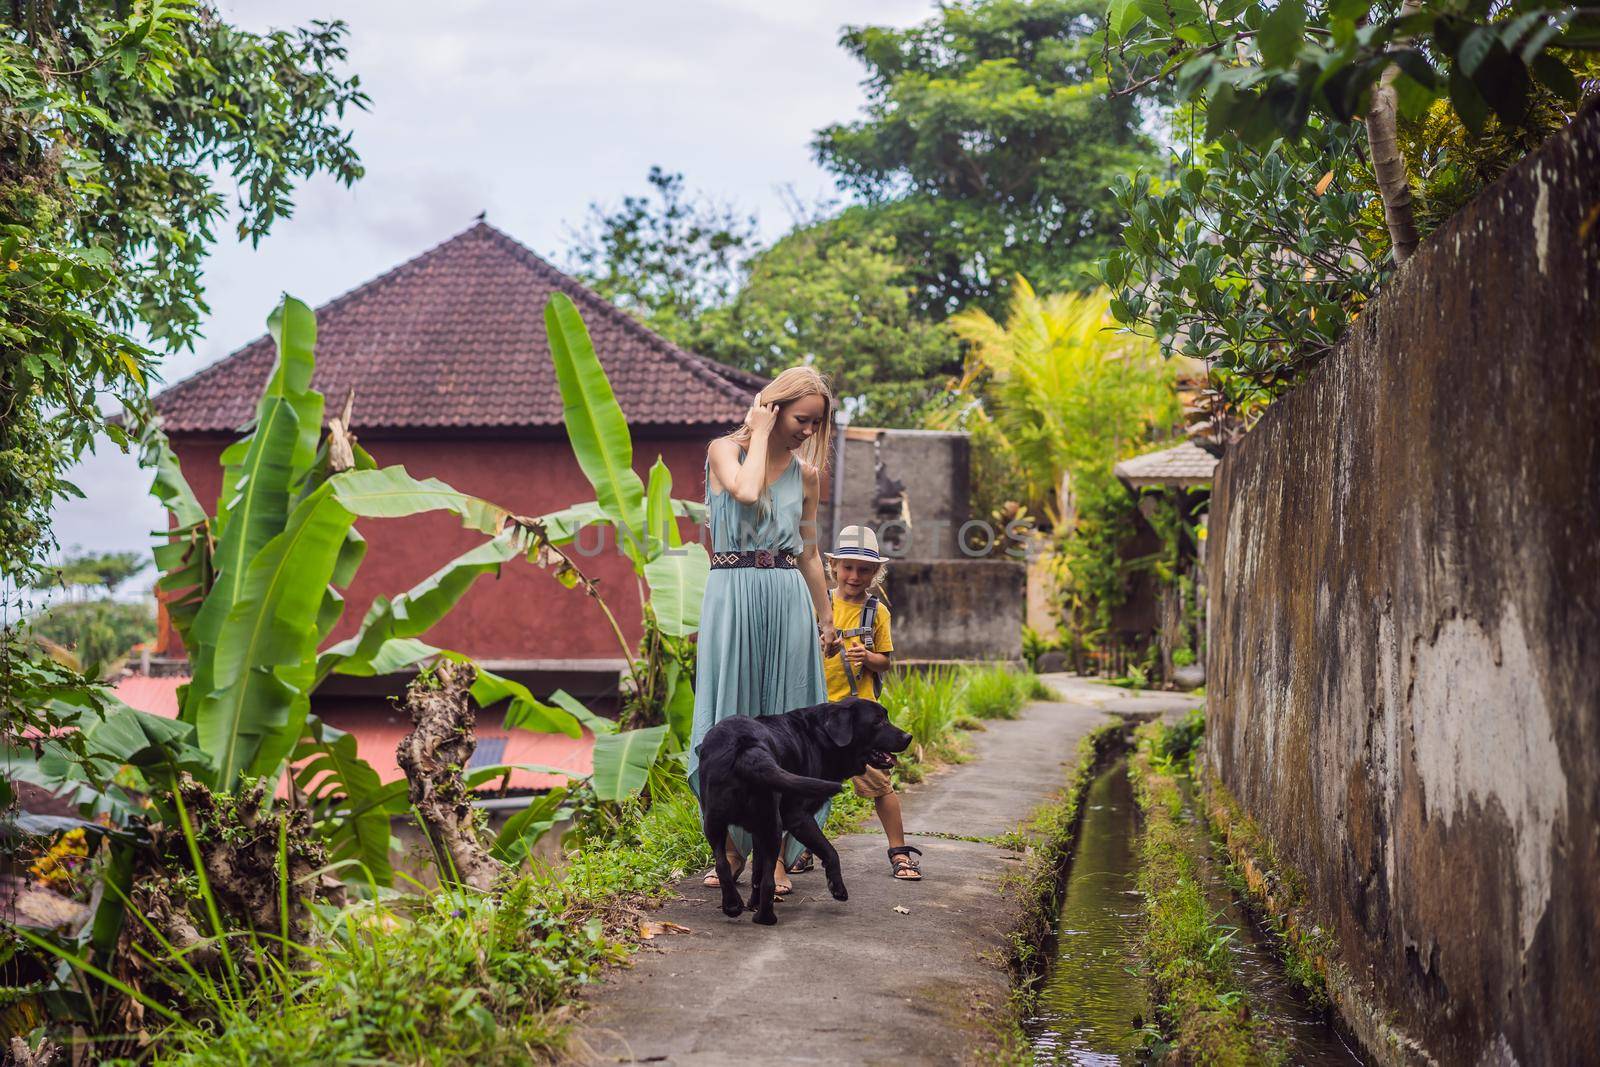 Bali dog. Mother and son tourists in Bali walks along the narrow cozy streets of Ubud. Bali is a popular tourist destination. Travel to Bali concept. Traveling with children concept.